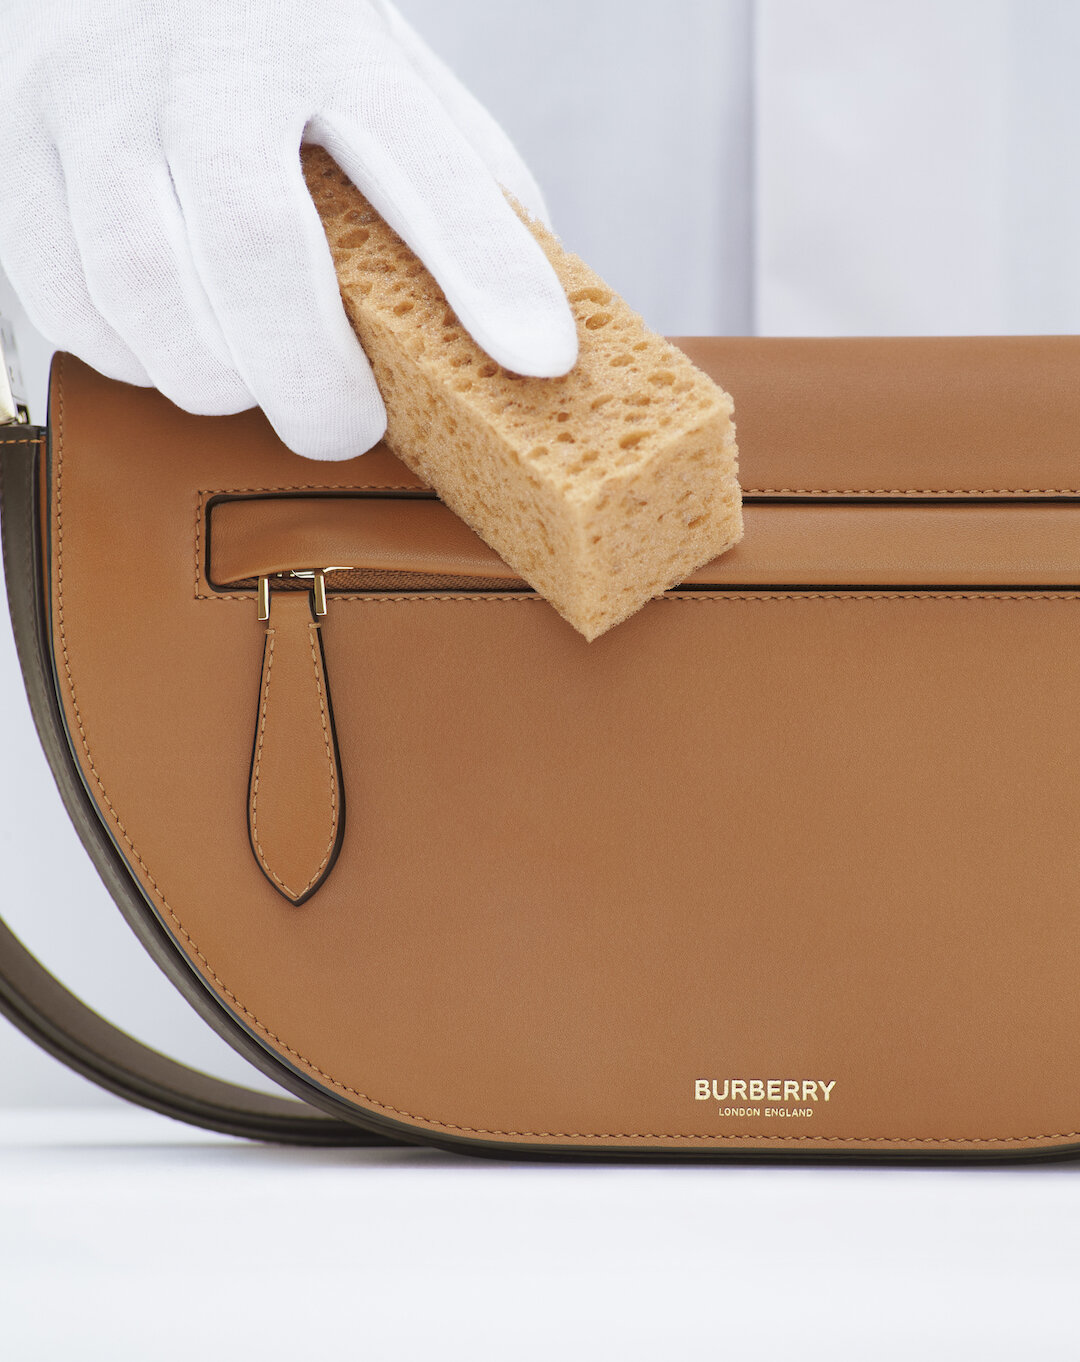 The Burberry Olympia Bag - The Craft Series — SSI Life